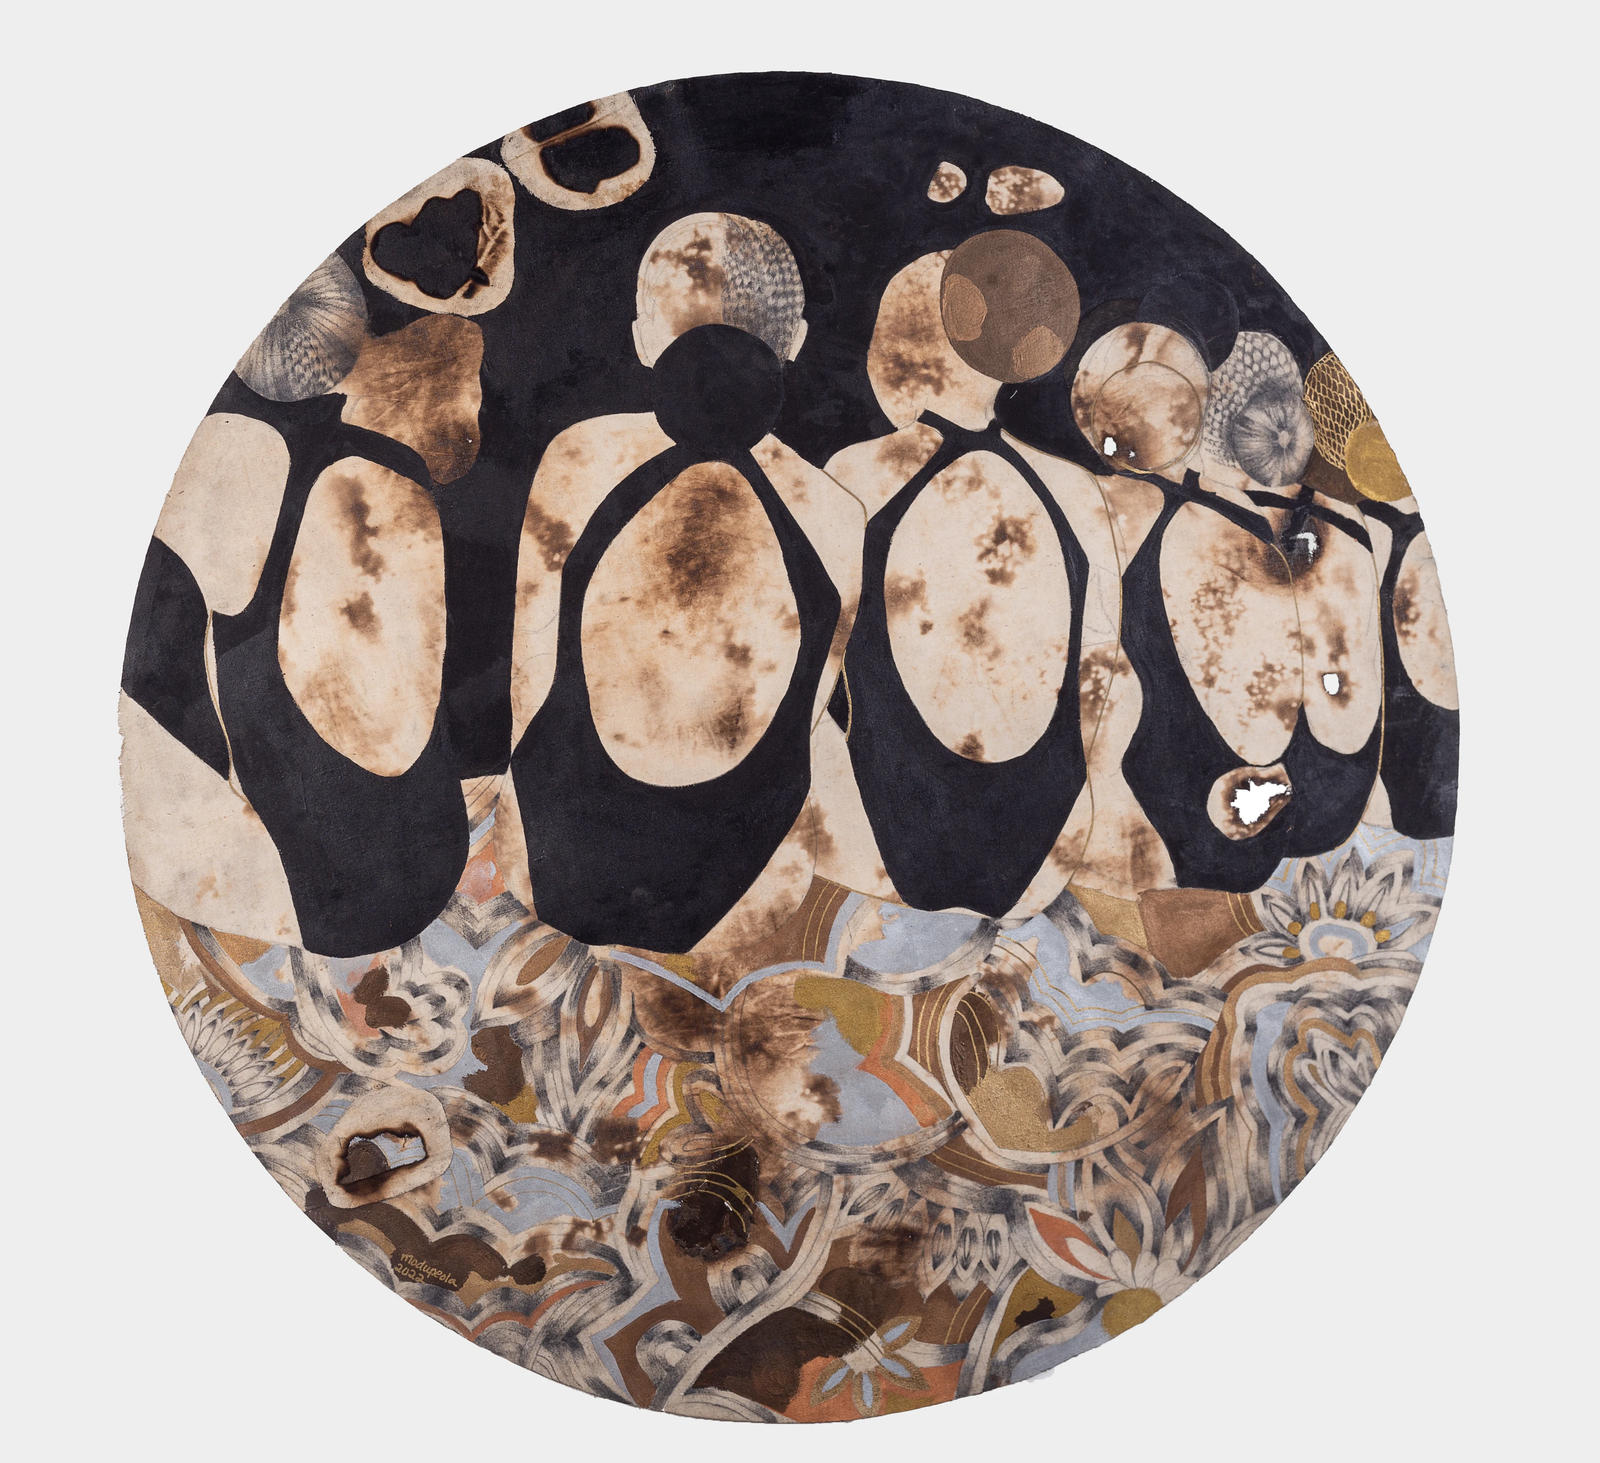 Modupeola Fadugba, Floral Focus, 2022,Acrylic, graphite, and metal leaf on burned canvas, 45 inch diameterCourtesy of the artist and Gallery 1957